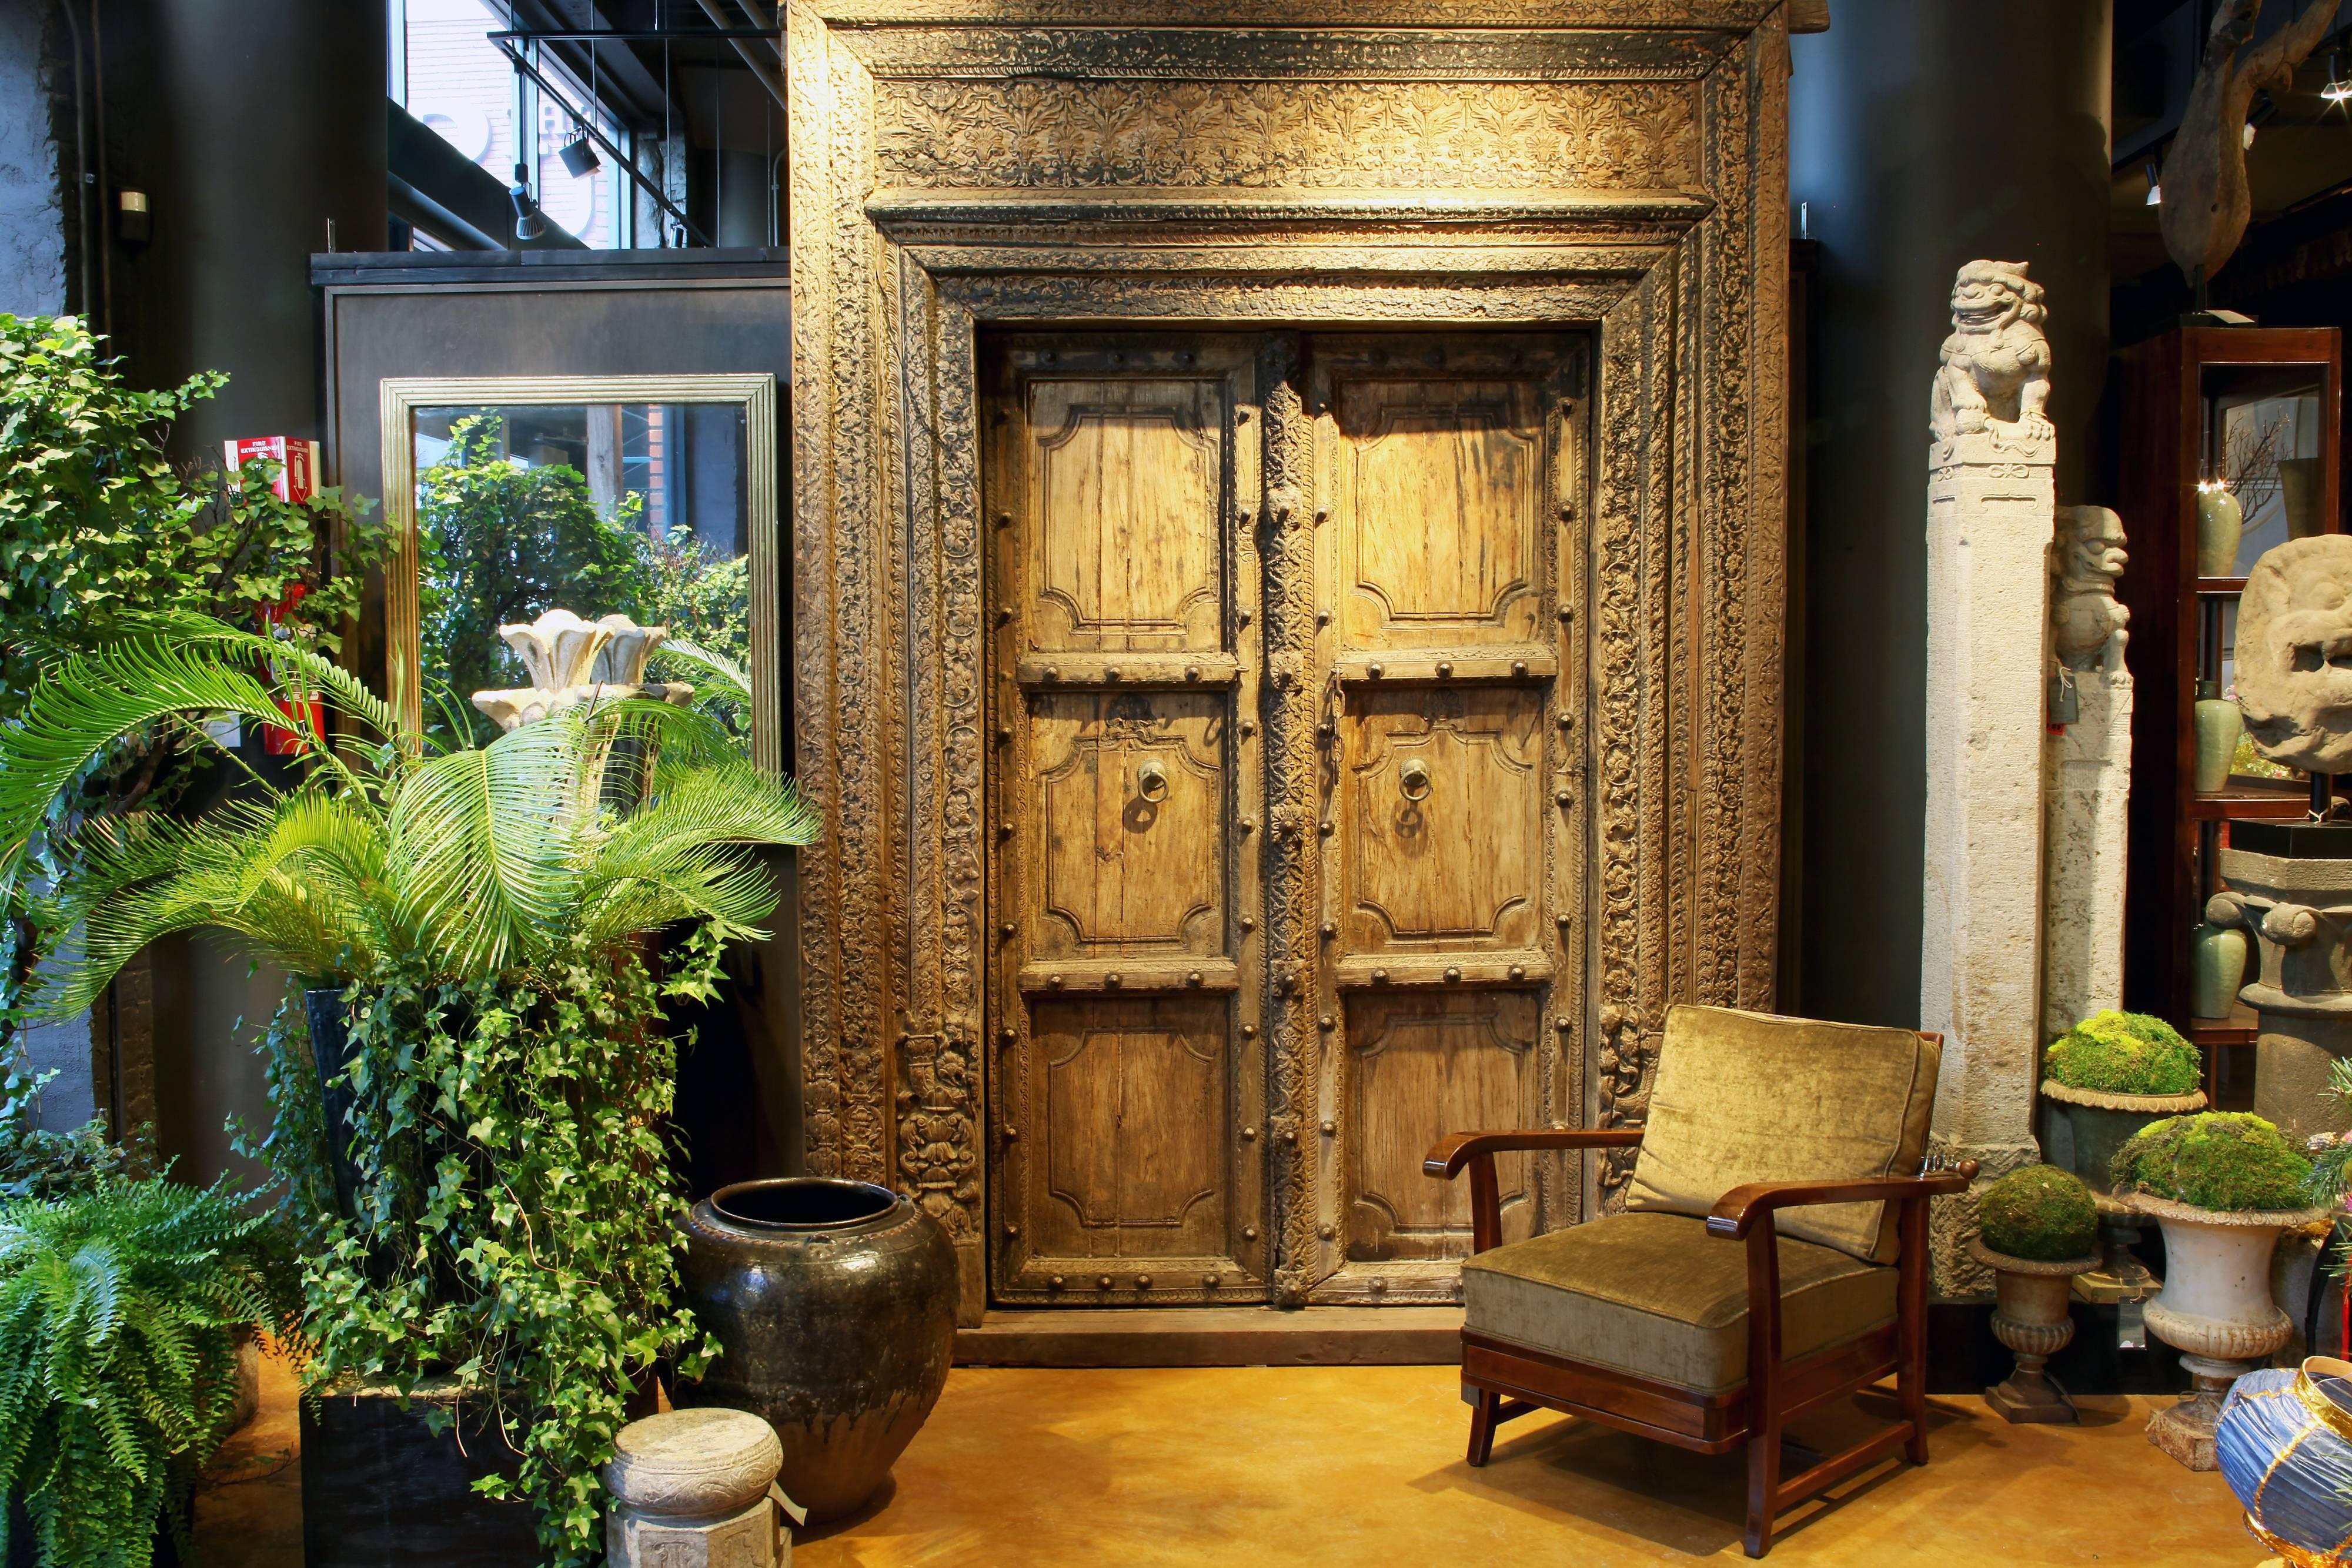 This complete entryway is handsomely relief-carved; the frame features intricate floral motifs and geometric patterns throughout. The paneled doors, with metal studs and hardware, open inwardly and can be secured with a chain and pin lock. The whole